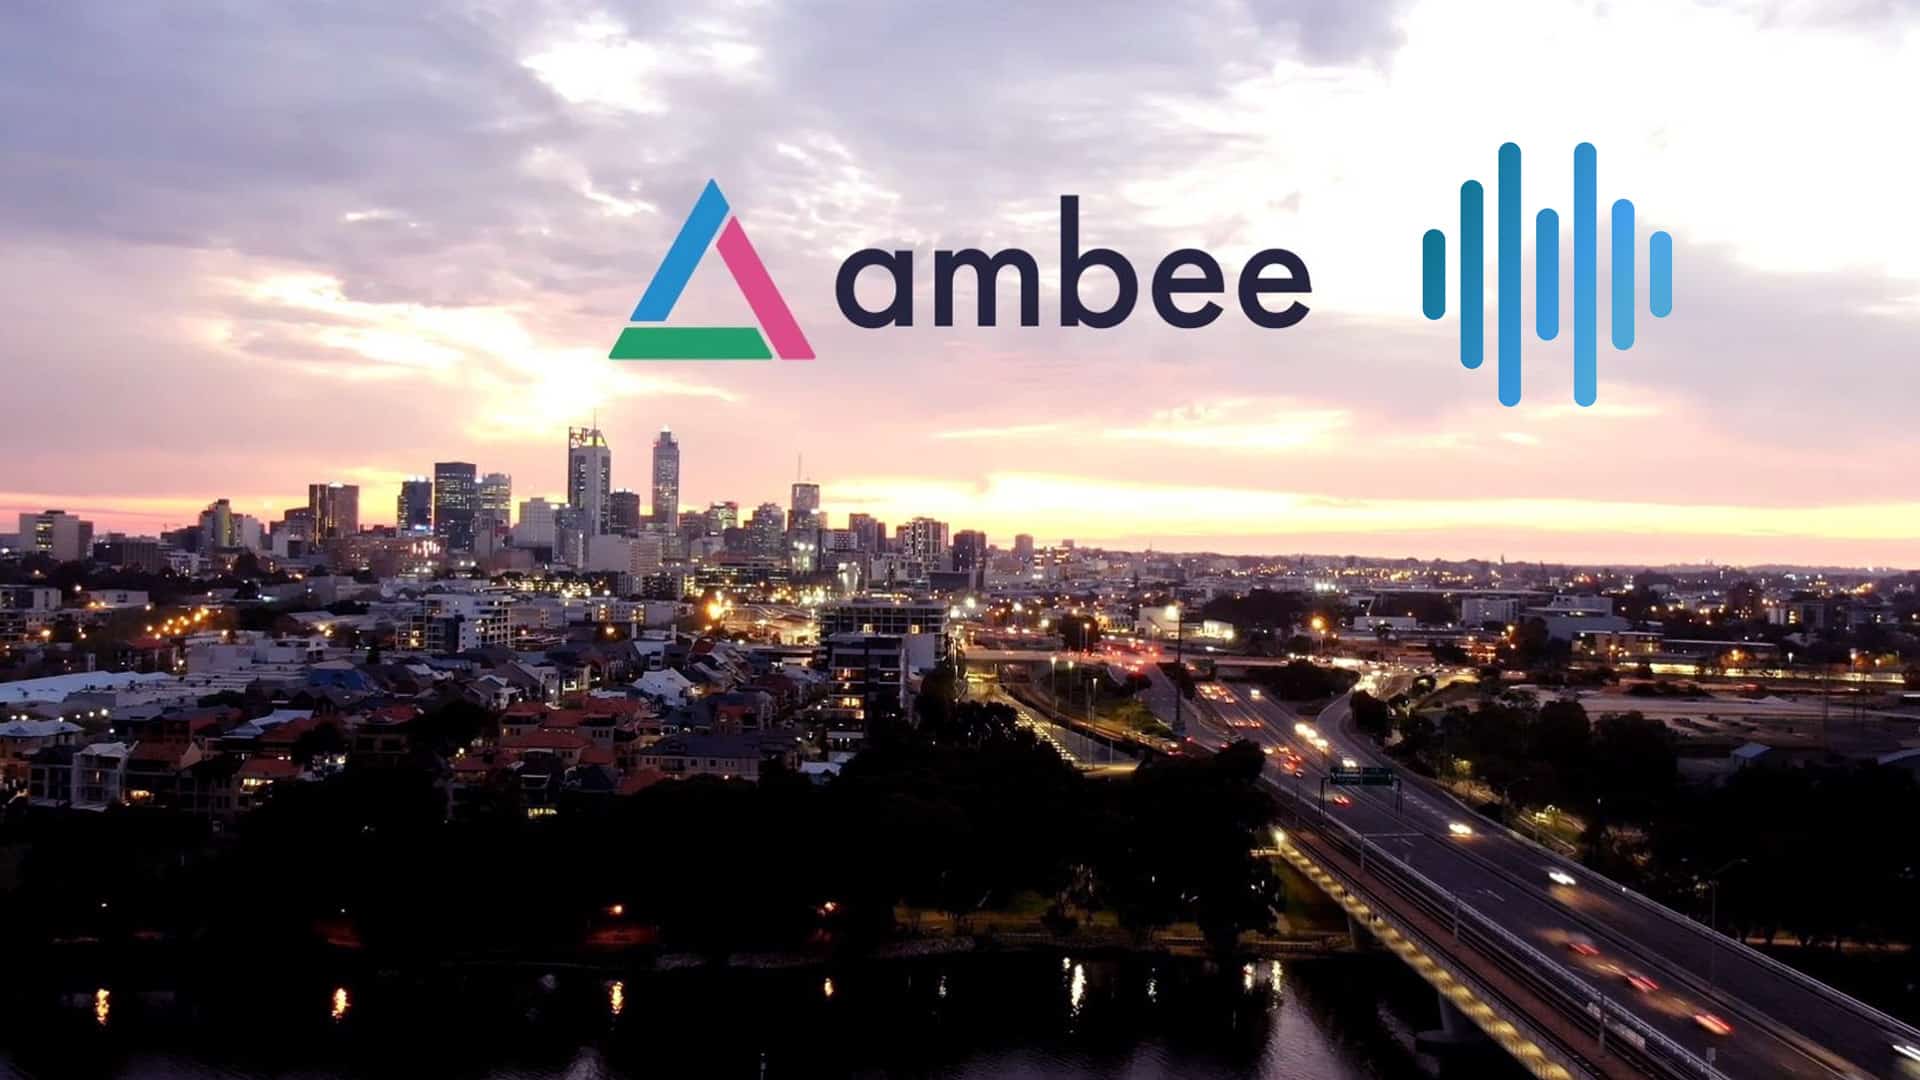 Ambee Partners with Razor Network to Provide Accurate and Reliable Environmental Data to Blockchain Applications and Users